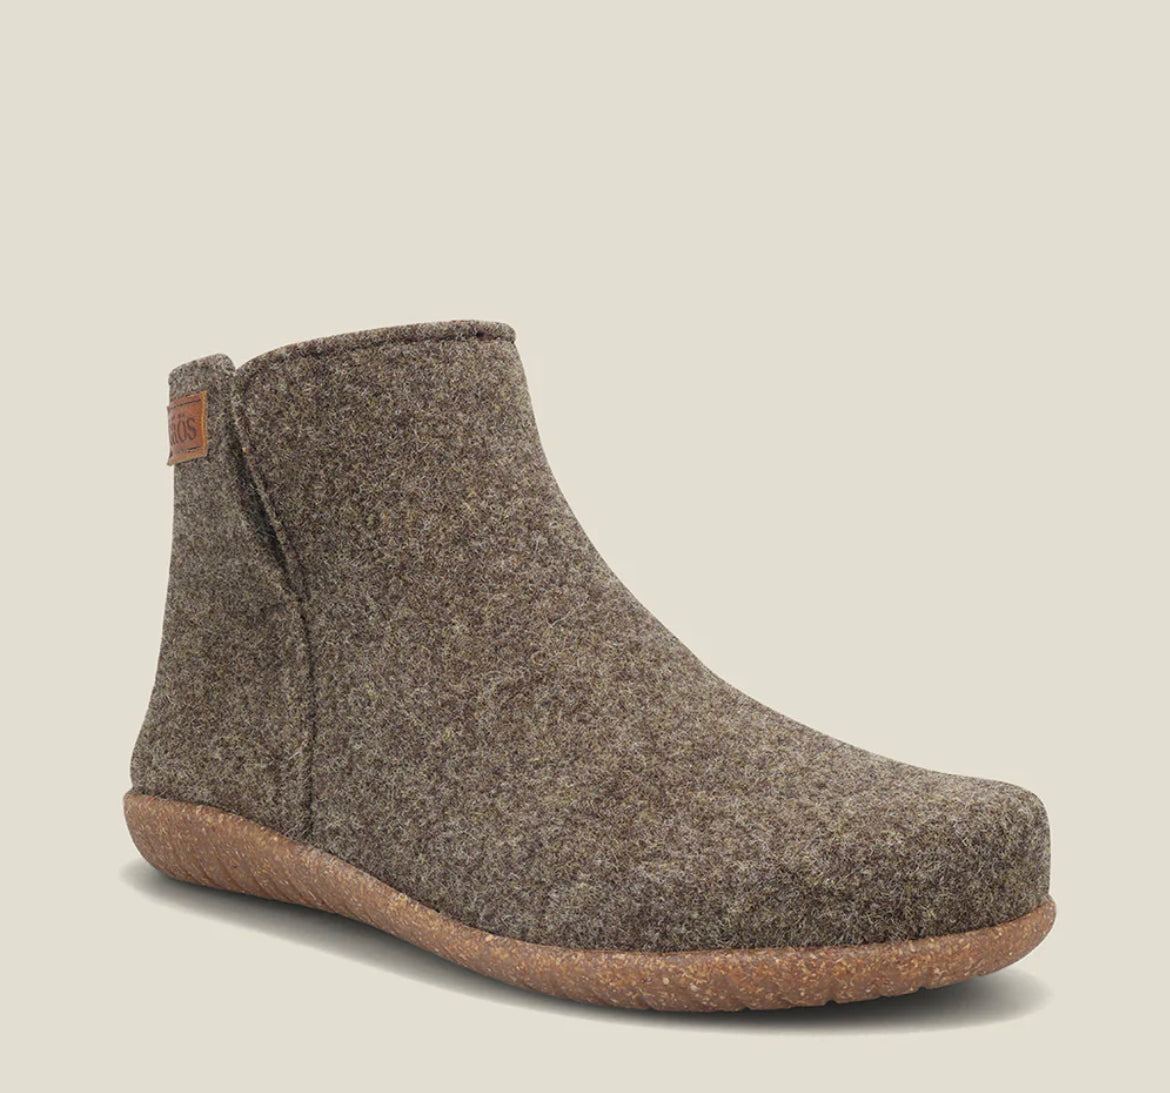 Taos Good Wool Brown Olive Women’s Boot - All Mixed Up 